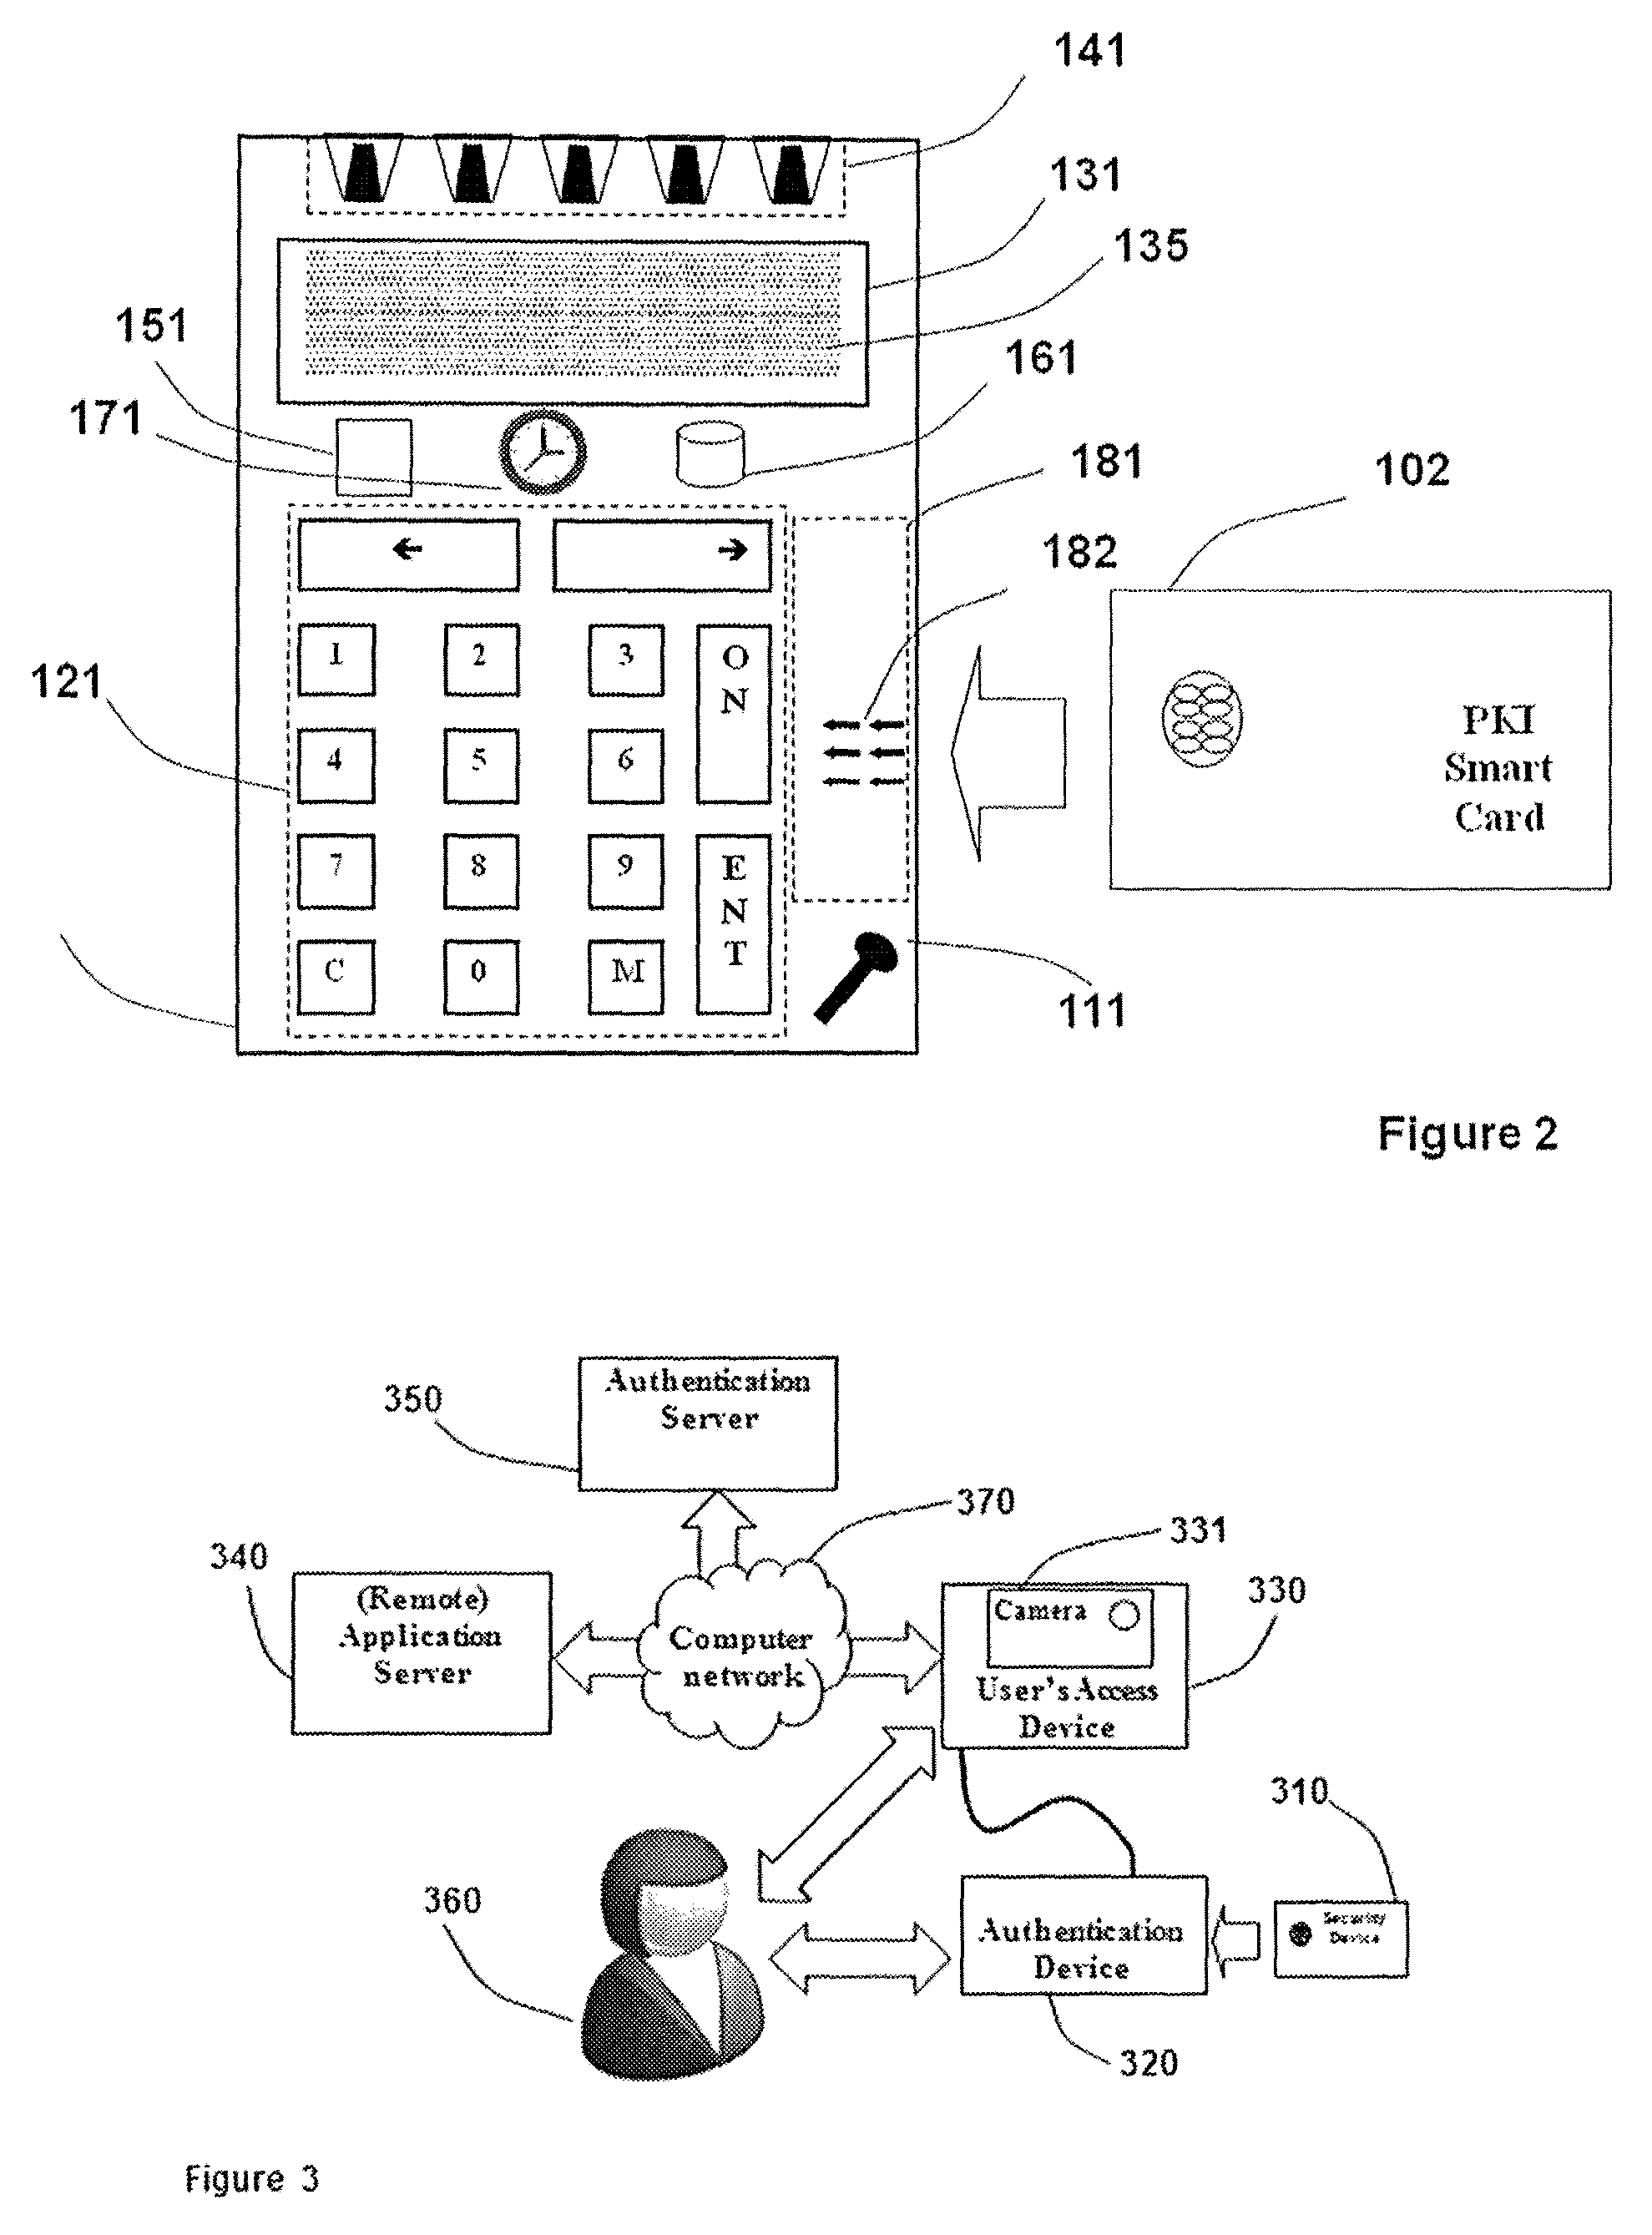 Strong authentication token with visual output of PKI signatures